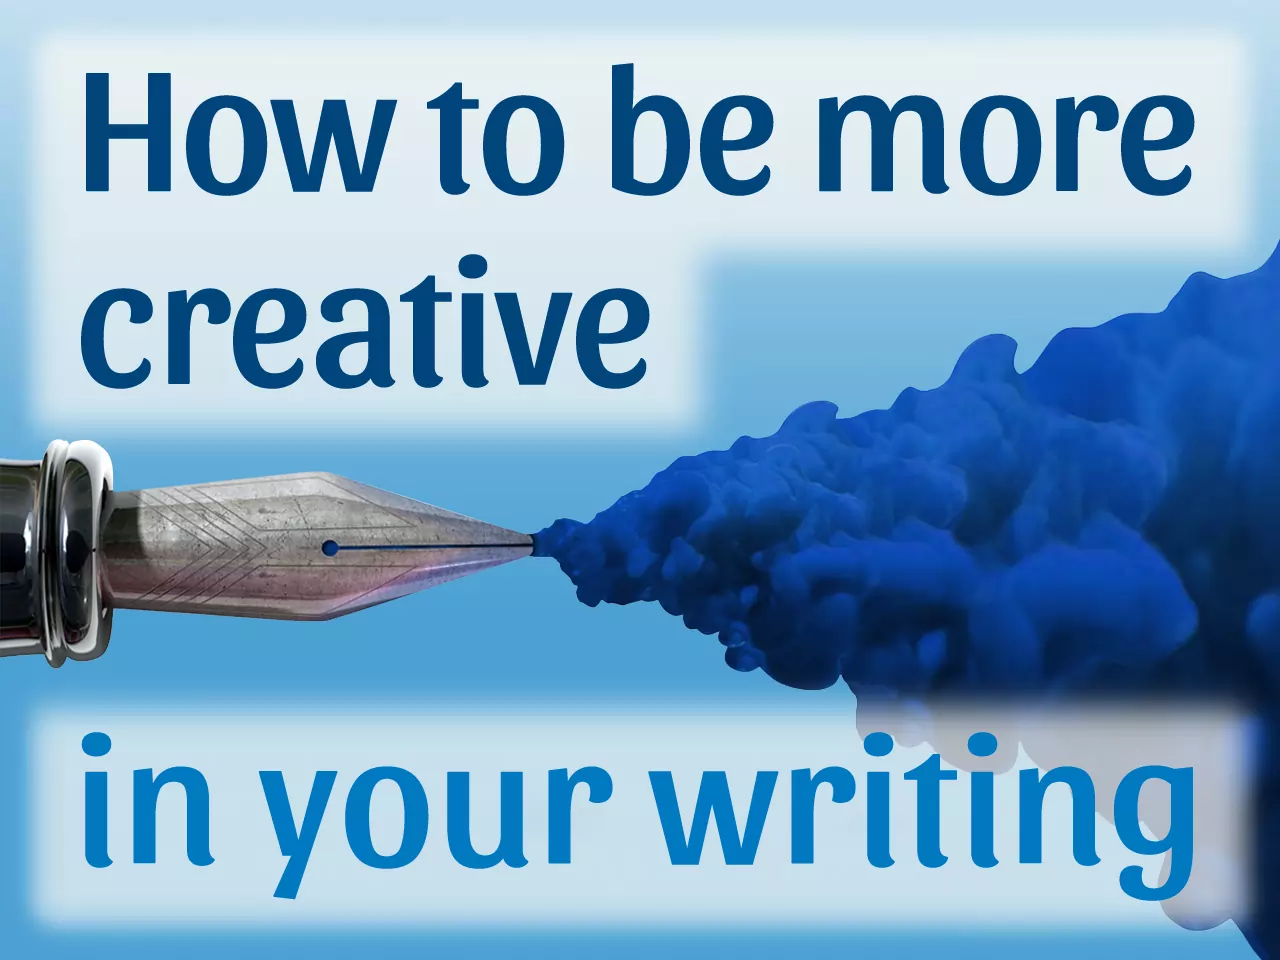 8 proven ways to be more creative and improve your writing (with scientific evidence)